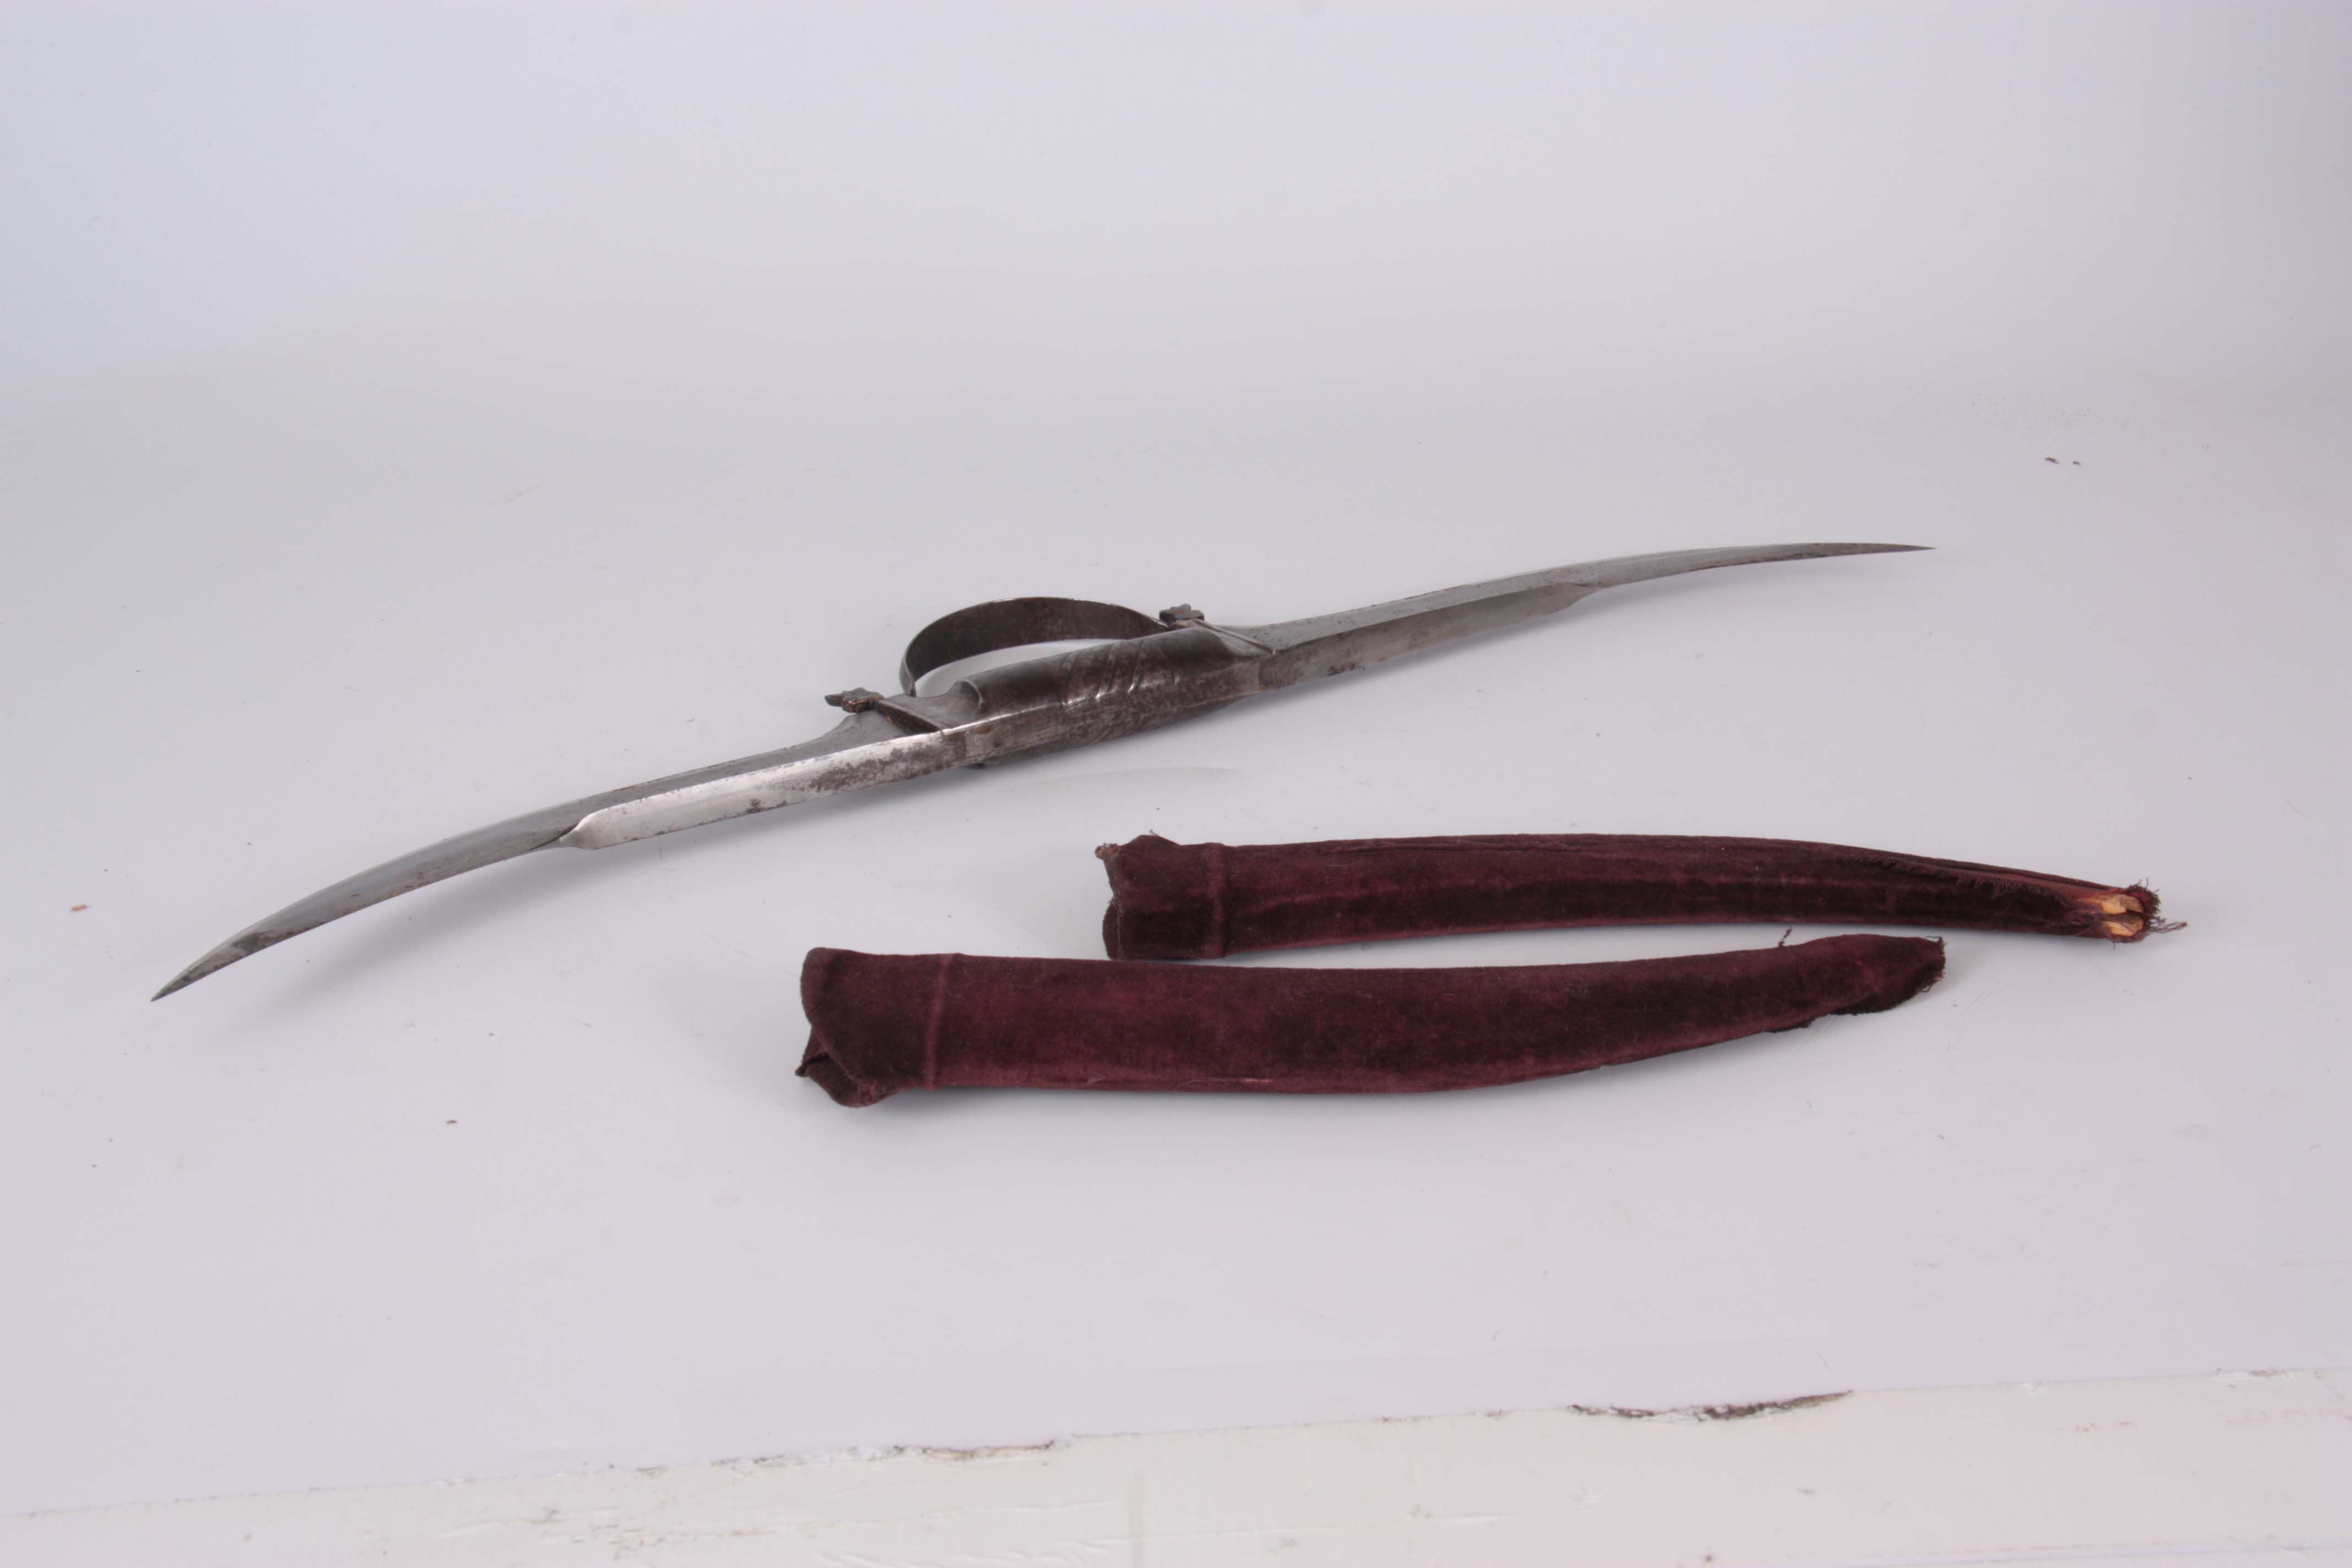 A RARE 18TH CENTURY RAJPUT DOUBLE DAGGER, HALADIE having two 9" curved steel blades joined by a - Image 5 of 8